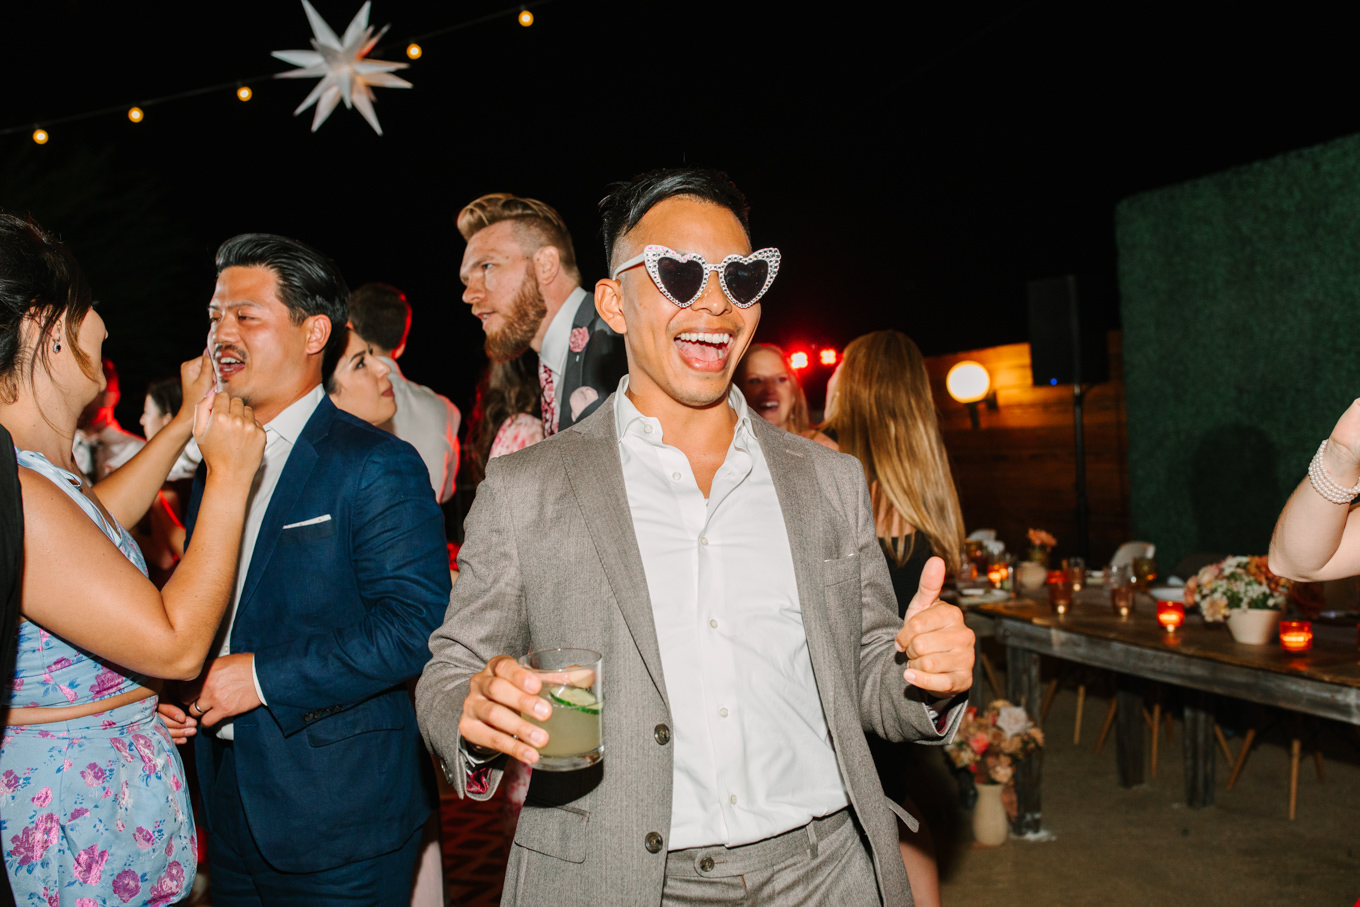 Dancing at wedding reception | Pink and orange Lautner Compound wedding | Colorful Palm Springs wedding photography | #palmspringsphotographer #palmspringswedding #lautnercompound #southerncaliforniawedding  Source: Mary Costa Photography | Los Angeles